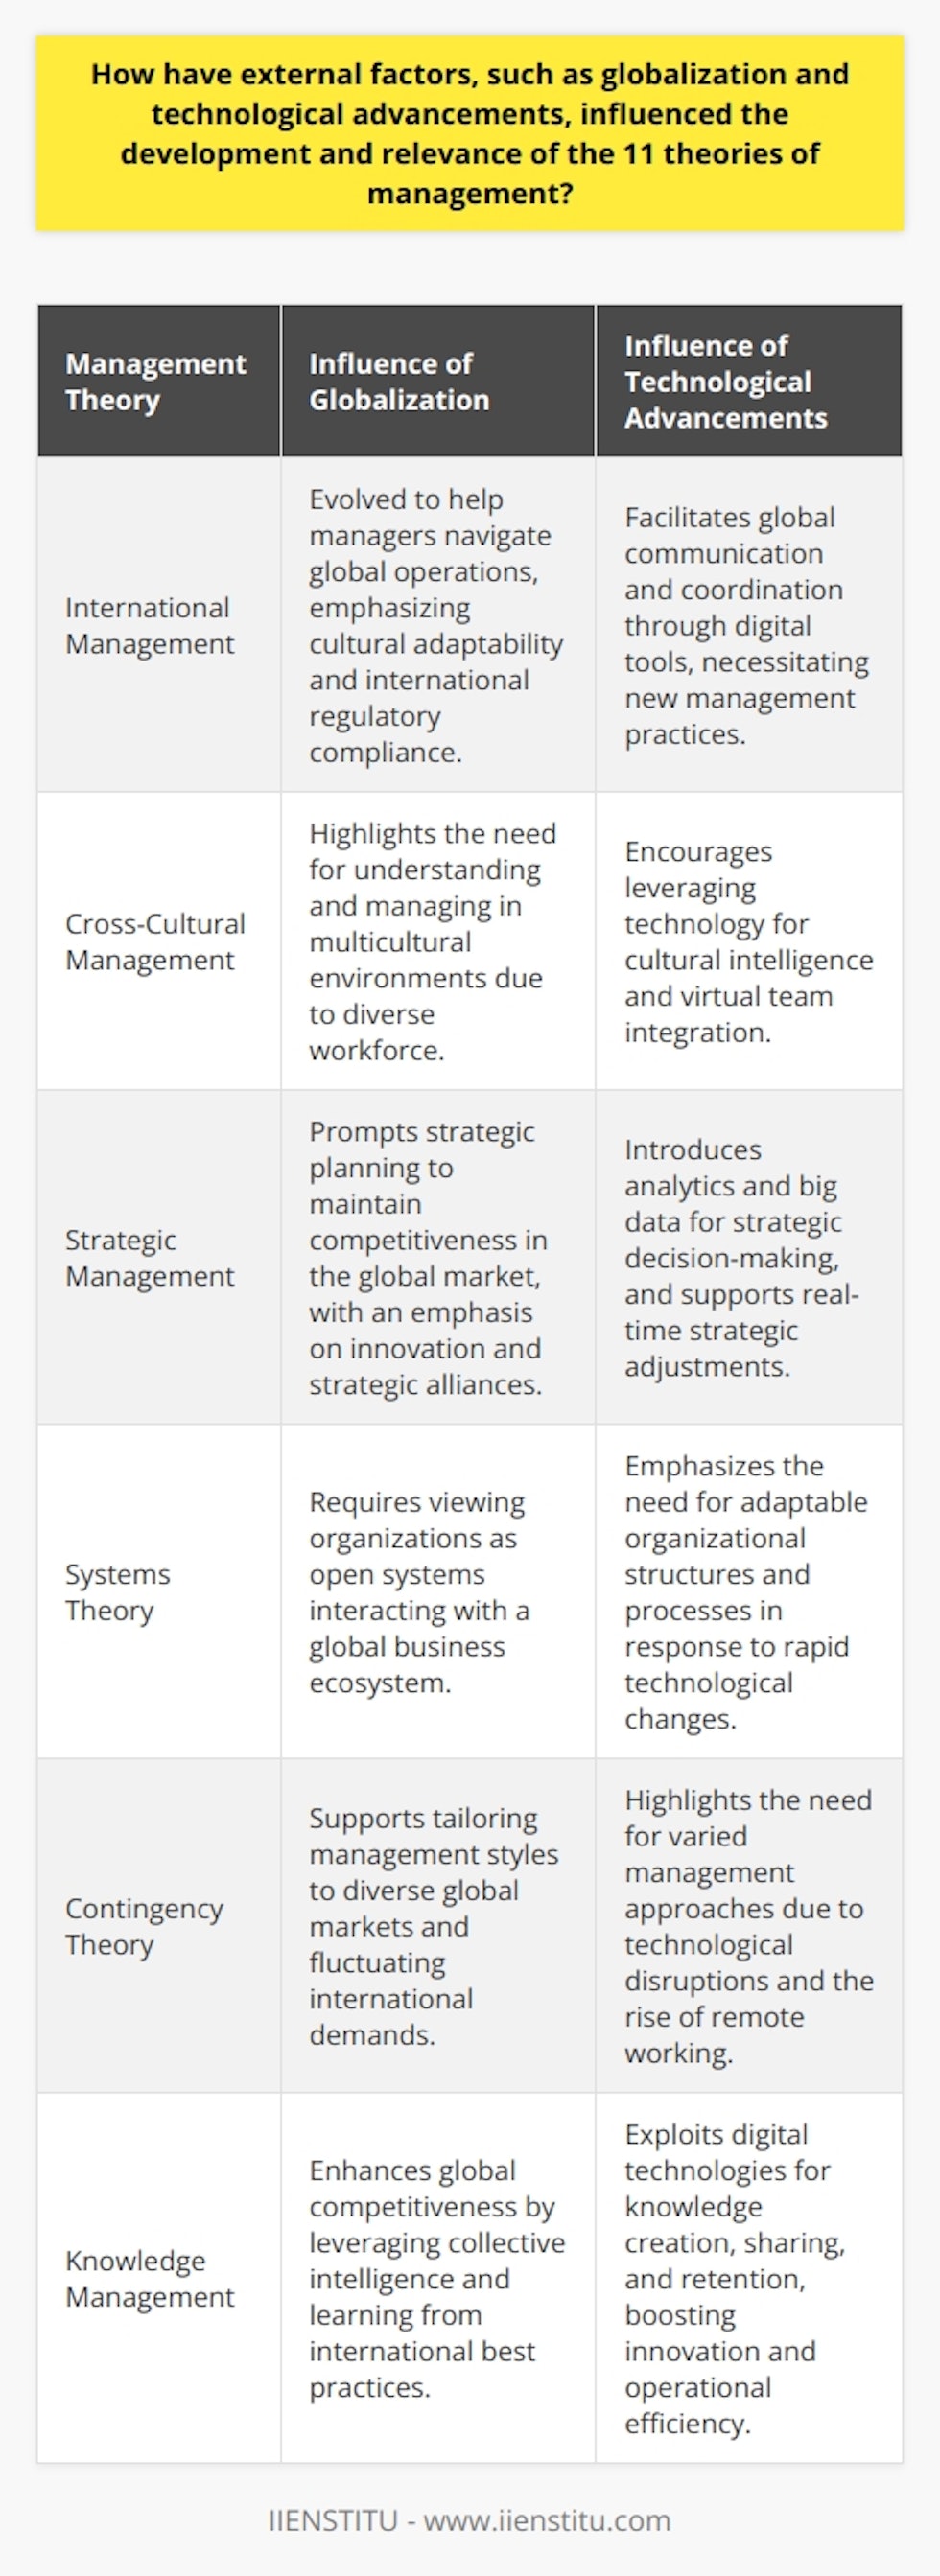 Globalization and technological advancements, two pivotal movements of the modern age, have greatly influenced the evolution and applicability of the 11 theories of management. These forces have reshaped the business landscape, demanding that management theories adapt to ensure organizational success.Globalization, characterized by the free movement of goods, services, and capital across borders, has significantly altered management practices. It has heightened the integration of world economies, making businesses operate in a more interconnected and interdependent environment. This global interconnectedness has necessitated the development of international management theories. These theories equip managers to handle operations that span multiple countries, each with its own culture, regulatory environment, and market dynamics. Such theories underscore the importance of being culturally aware and adaptable to diverse business ecosystems. Consequently, cross-cultural management theories have emerged to assist managers in understanding and reconciling cultural differences, as managing a multicultural workforce has become a critical aspect of organizational success.Moreover, globalization has spurred intensified competition. Organizations are no longer competing with local firms but with global ones. This raised the stakes for strategic management theories designed to offer a competitive edge. Businesses began adopting strategic management principles to craft and execute strategies that capitalize on global opportunities while mitigating risks associated with global operations.In concert with globalization, technological advancements have dramatically transformed management theories. The Digital Age introduced new ways of working and communicating, rendering some traditional management practices obsolete. For example, the rigid command-and-control hierarchy exemplified by bureaucratic theories has been challenged by more flexible and dynamic management styles. In this context, systems theory has gained prominence, viewing organizations as organic systems that interact dynamically with their environment, influenced by various factors such as technology and market changes. These insights promote a holistic approach to management that’s responsive to a rapidly changing external landscape.Likewise, contingency theory's proposition that there is no one best way to manage has become even more germane. With the mutable nature of technology, organizations must constantly adapt their management practices. This theory stresses the importance of managers being able to apply different strategies and structures based on specific situations, especially as we witness the rise of virtual teams and remote working.The advancements in technology have also facilitated the growth of knowledge management as a strategic resource for organizations. The ability to gather, store, process, and disseminate knowledge is now seen as a key competitive advantage. Management theories now emphasize the importance of information management and the role of technology in streamlining decision-making processes and enhancing productivity.In conclusion, globalization and technological advancements have infused the 11 theories of management with new vitality, pushing them to evolve continually. These external factors have prompted businesses to adopt more strategic, adaptable, and culturally sensitive management approaches. While these theories have provided foundational principles, ongoing transformation is essential to keep pace with the complexities of the modern business environment. Organizations and their leaders must therefore remain keenly attuned to these shifts, ensuring that the theories informing their management practices are as dynamic and responsive as the markets they operate within.